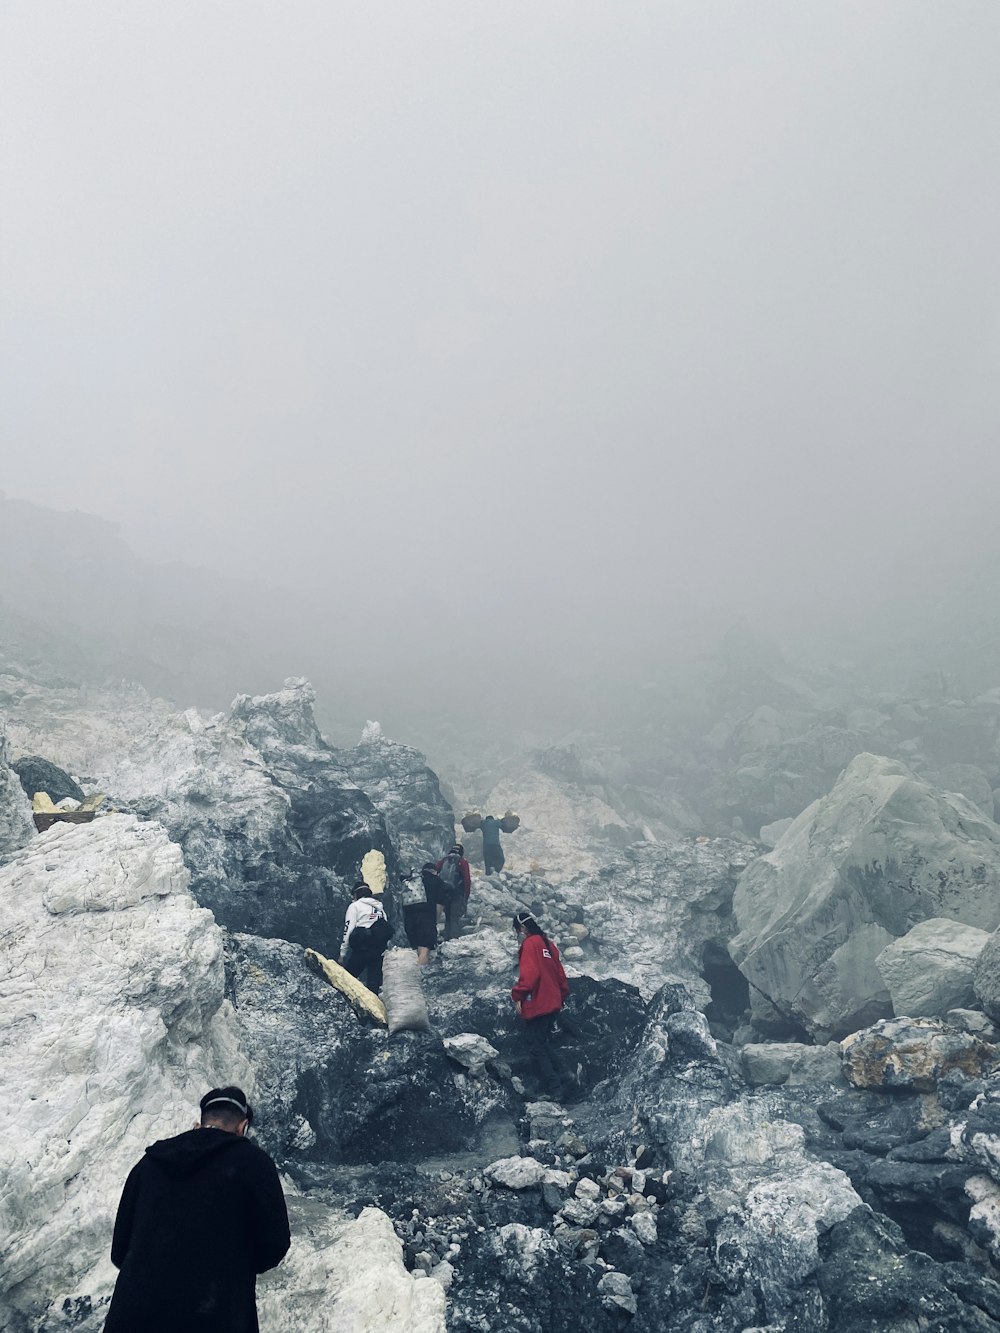 a group of people standing on top of a snow covered mountain